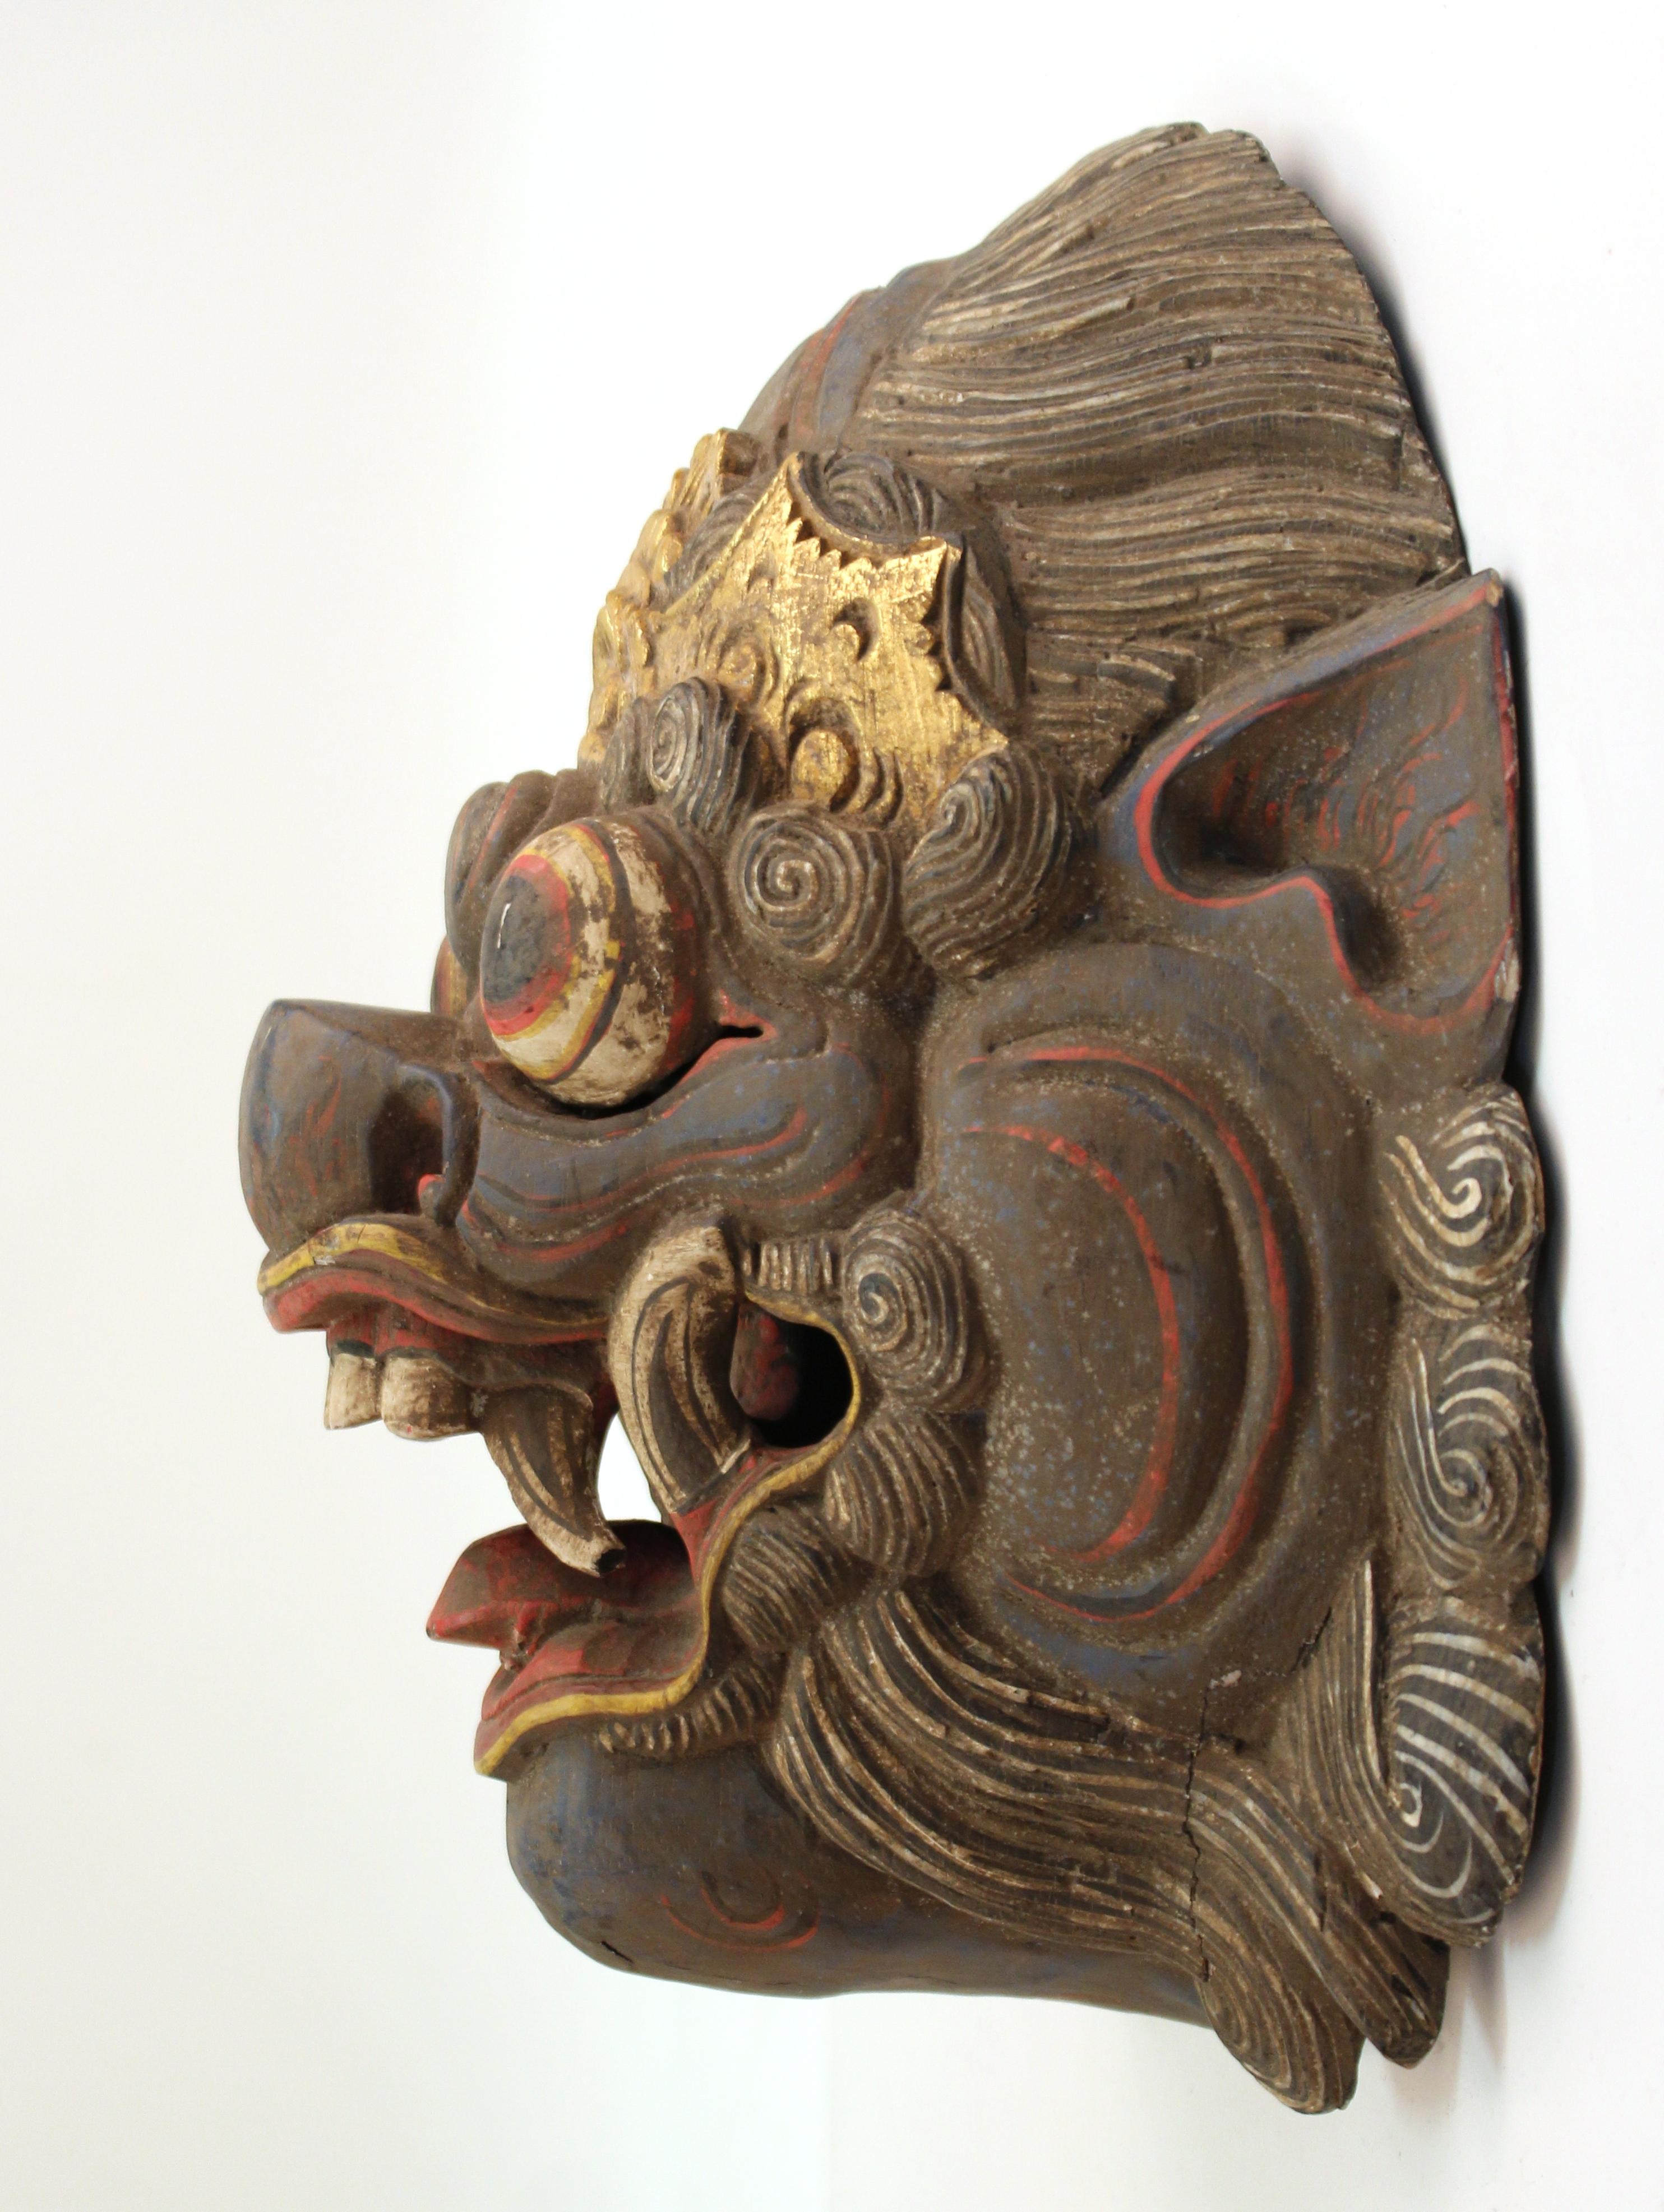 Indonesian Balinese Barong Carved Wood Dance Mask